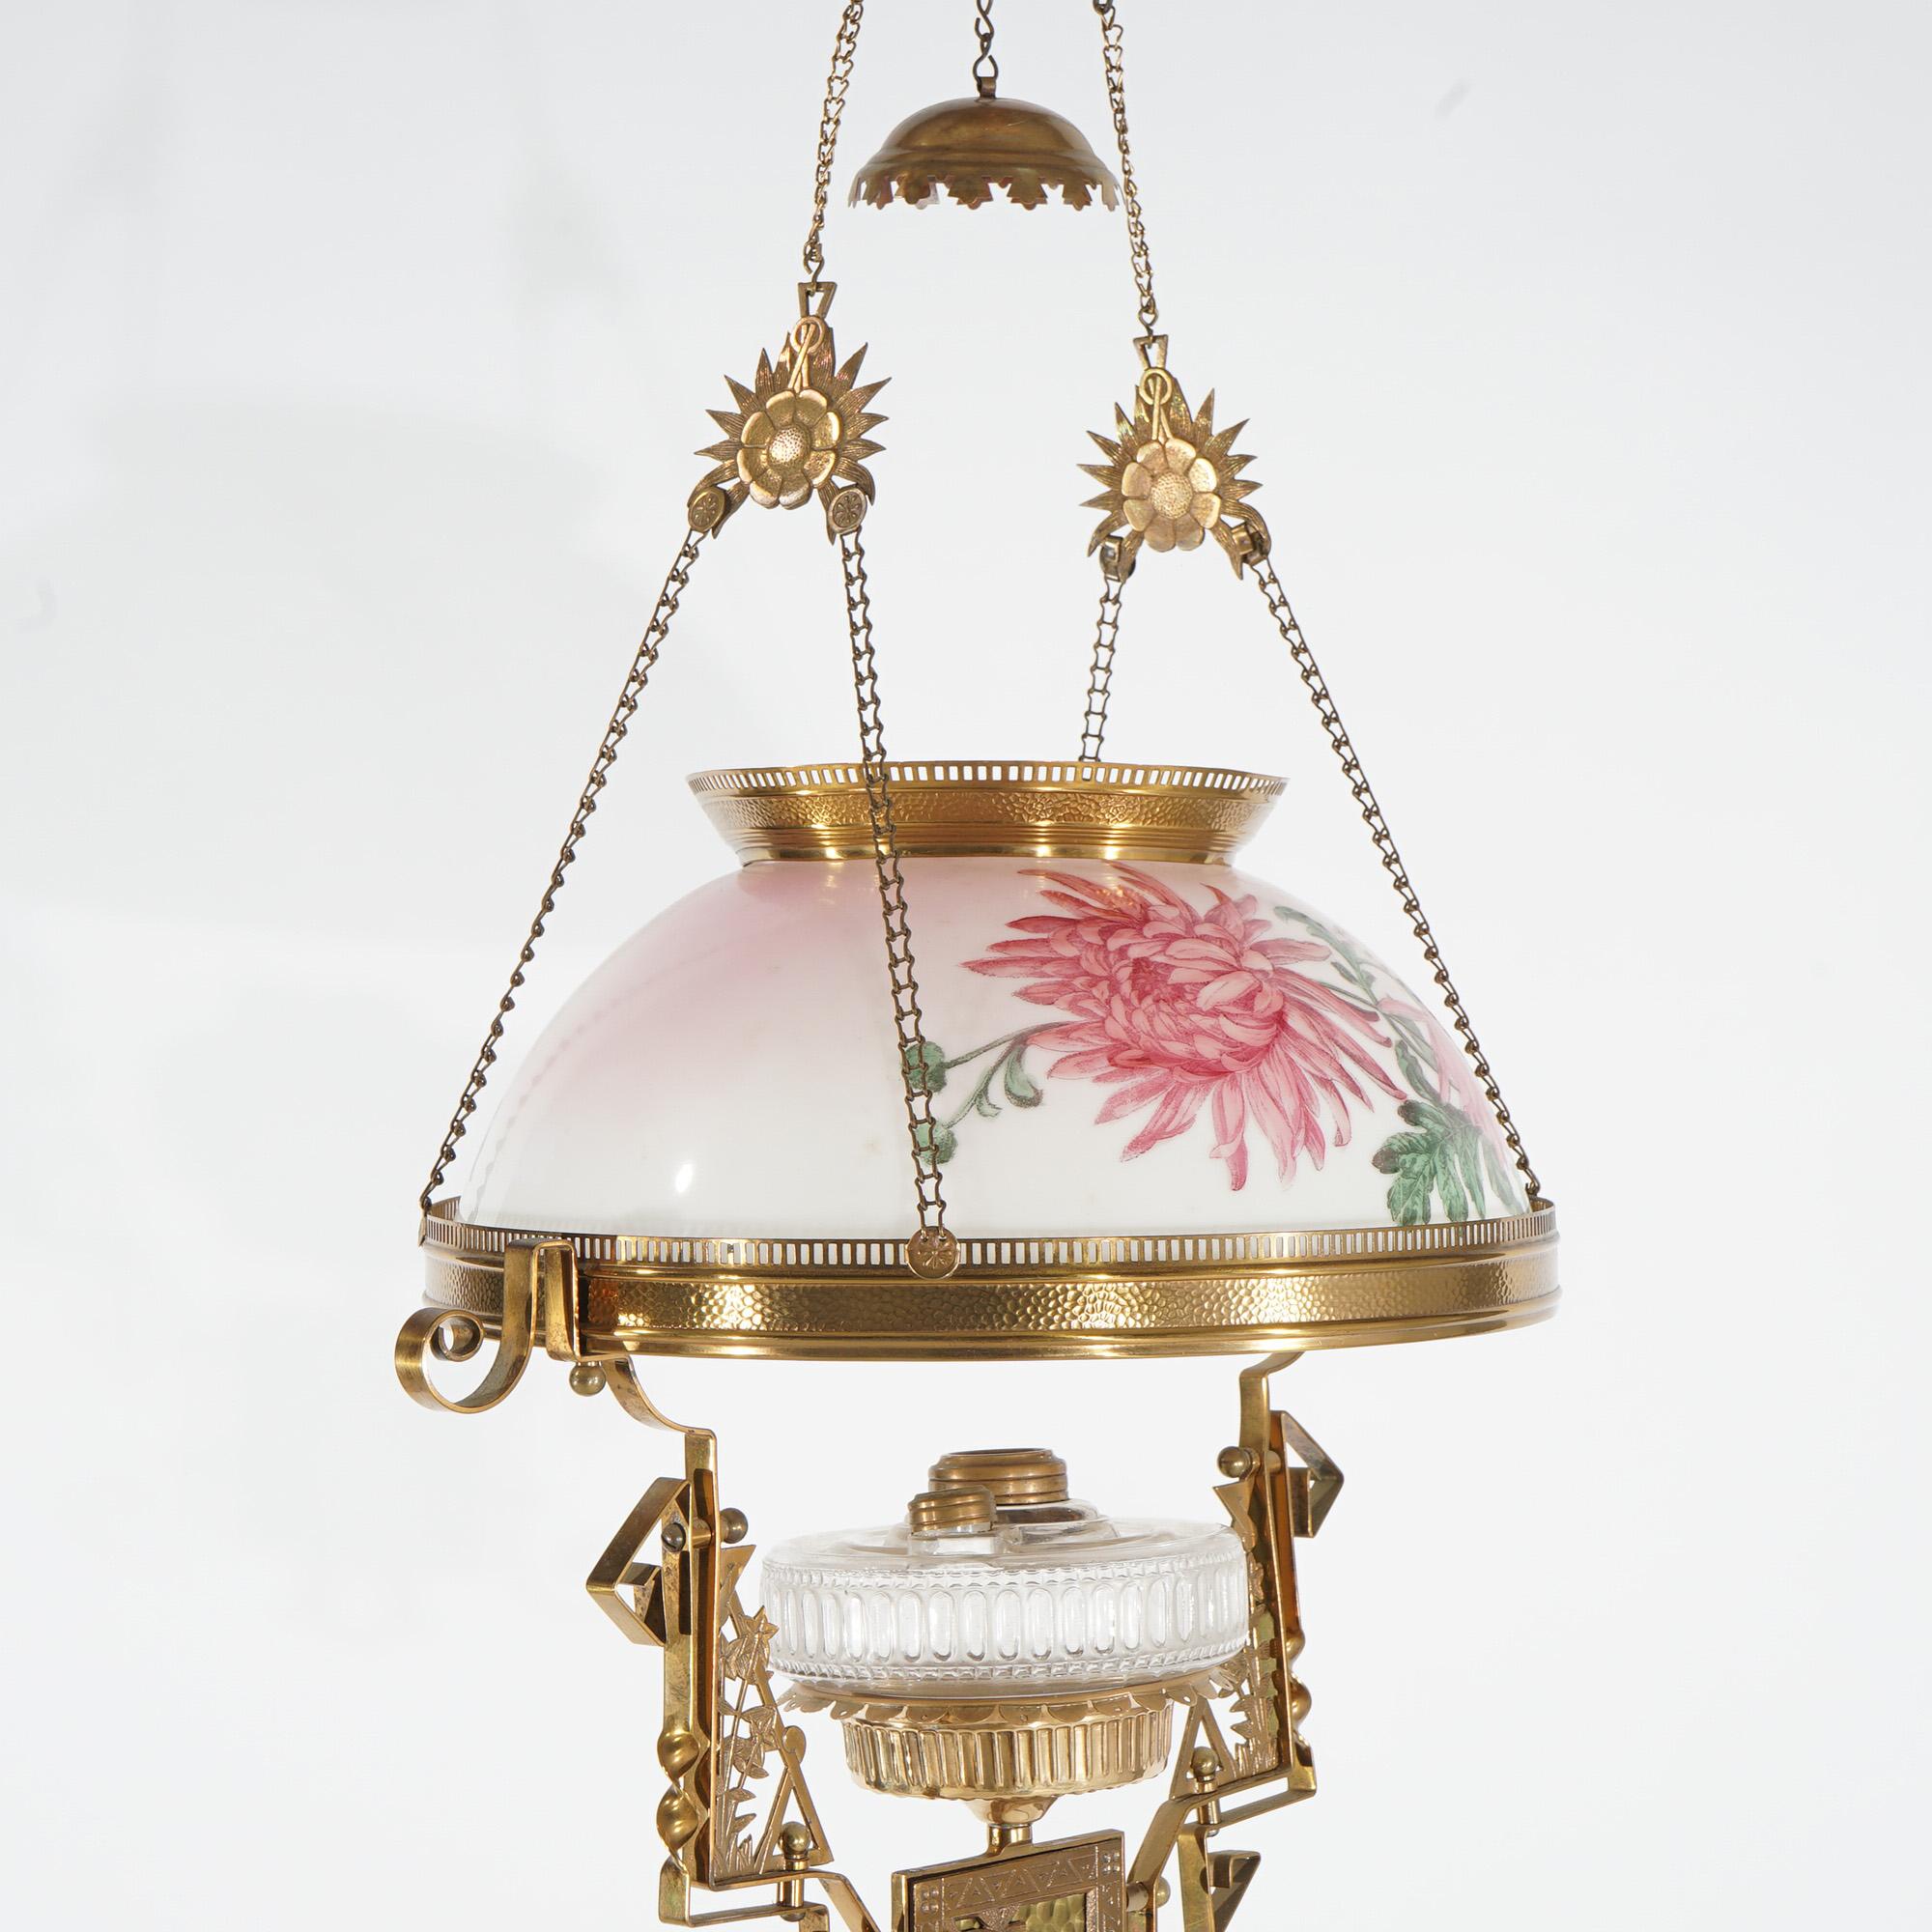 Antique Aesthetic Movement Hand Painted Hanging Kerosene Lamp C1890 In Good Condition For Sale In Big Flats, NY